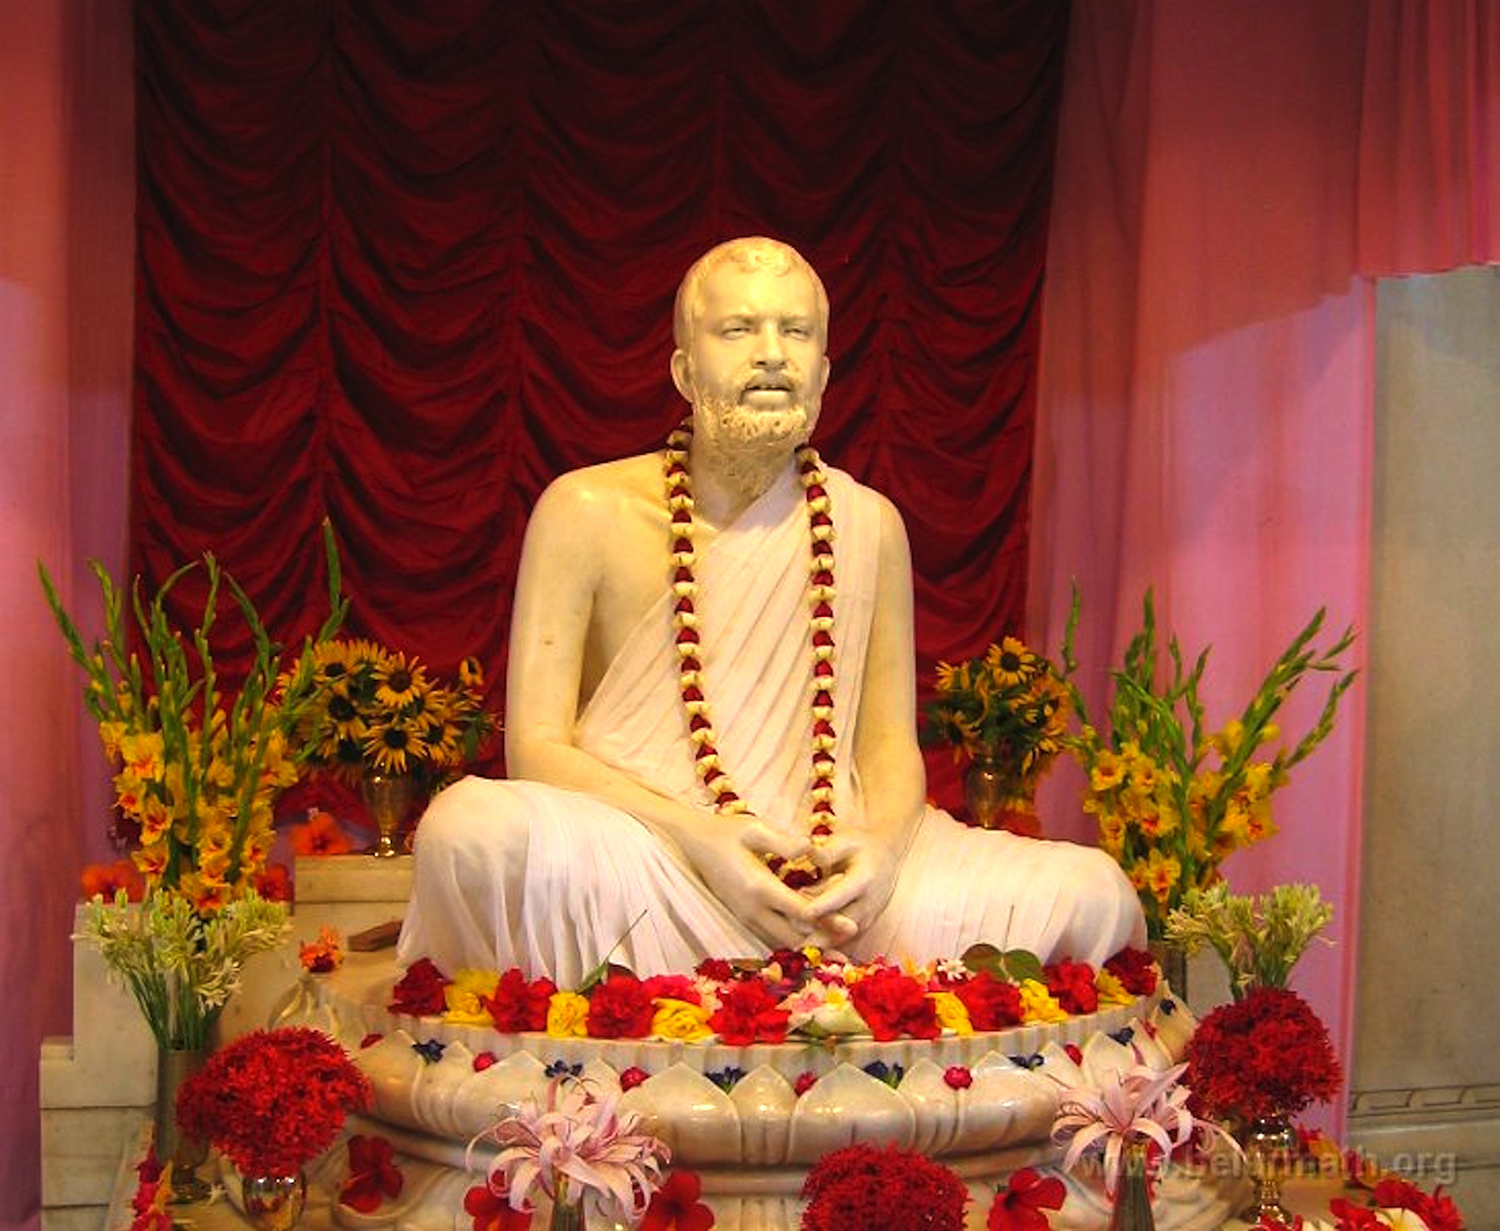 Scupture of Sri Ramakrishna seated with a flower necklasurrounded by flowers.